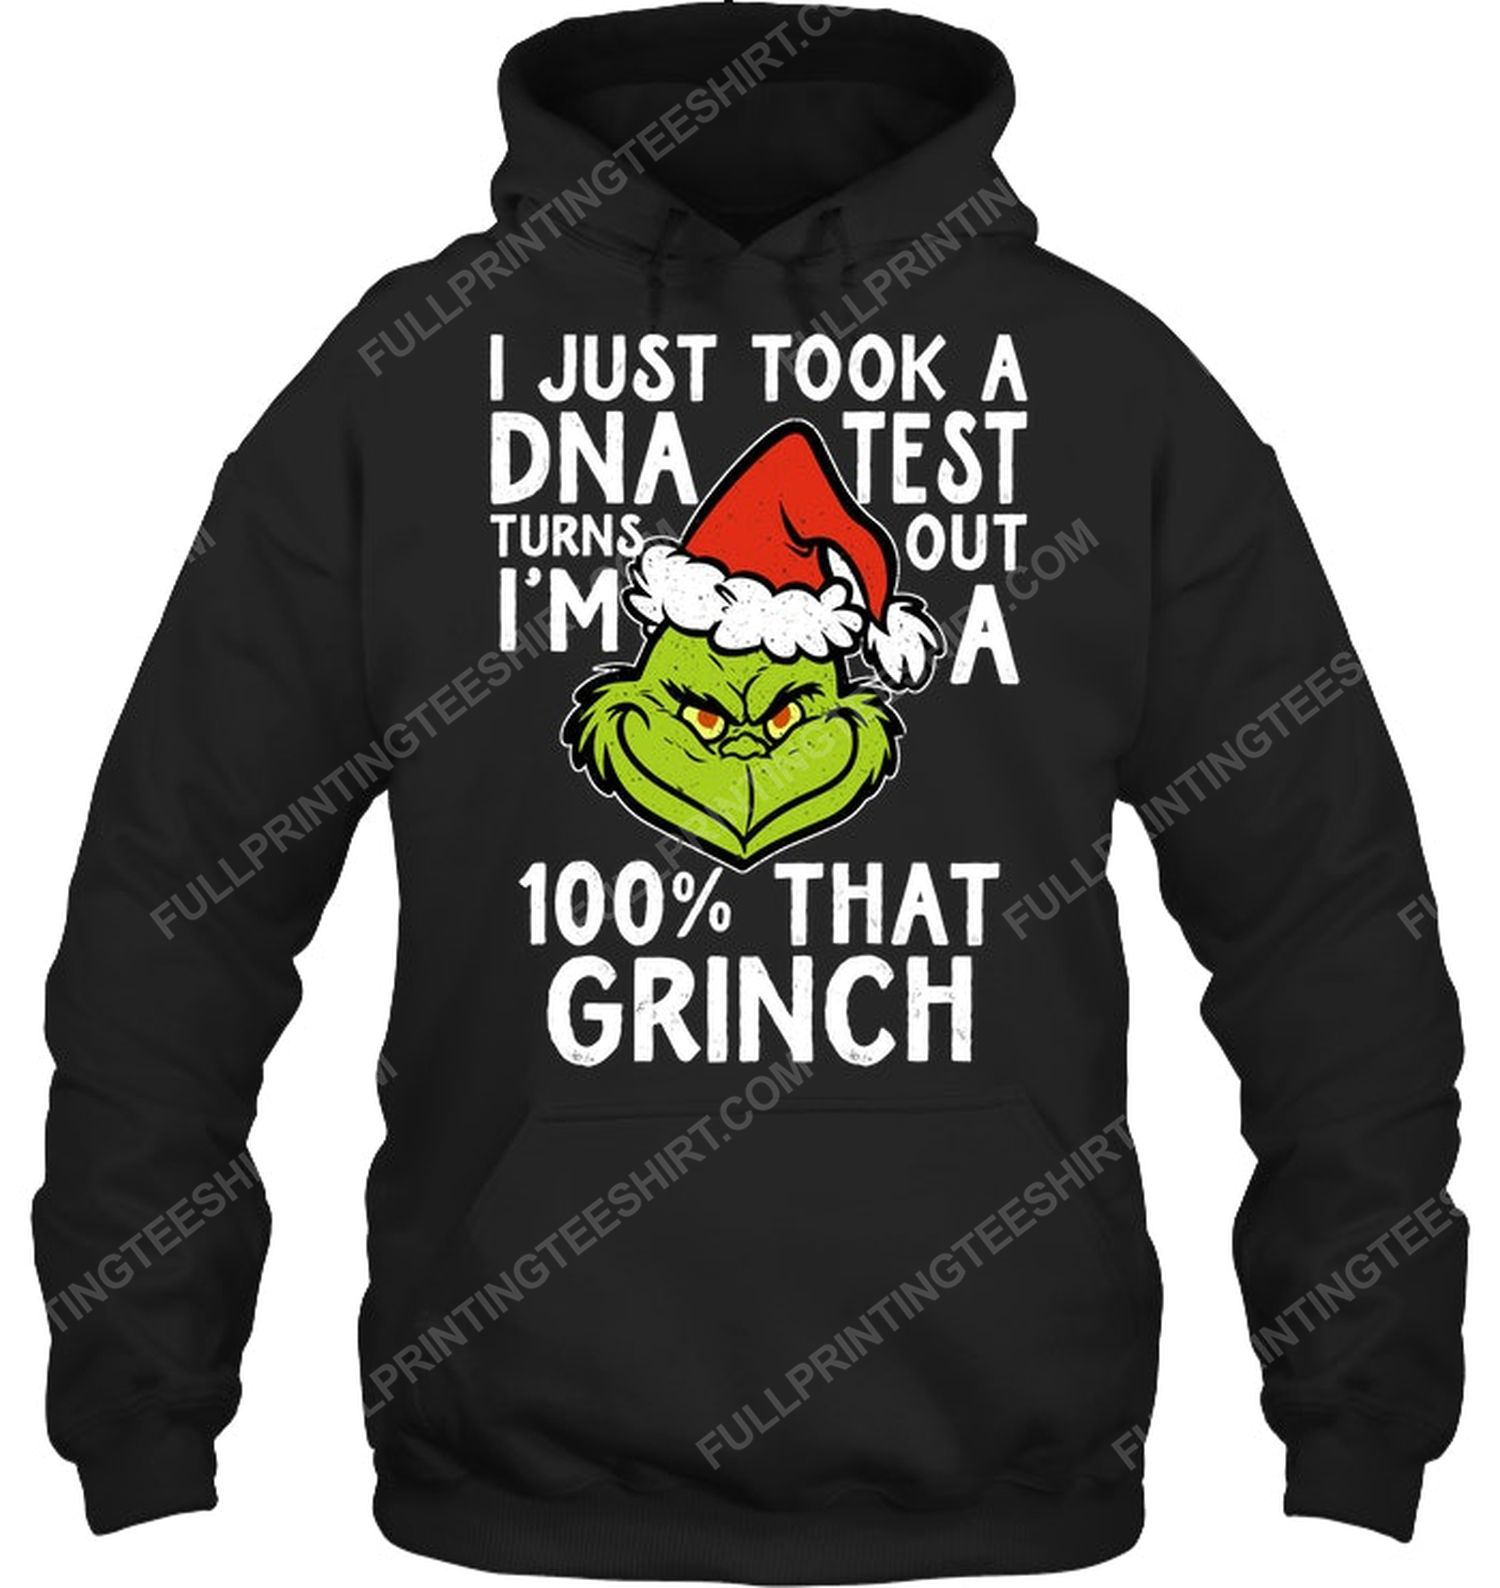 I just took a dna test turns out i'm 100 that grinch hoodie